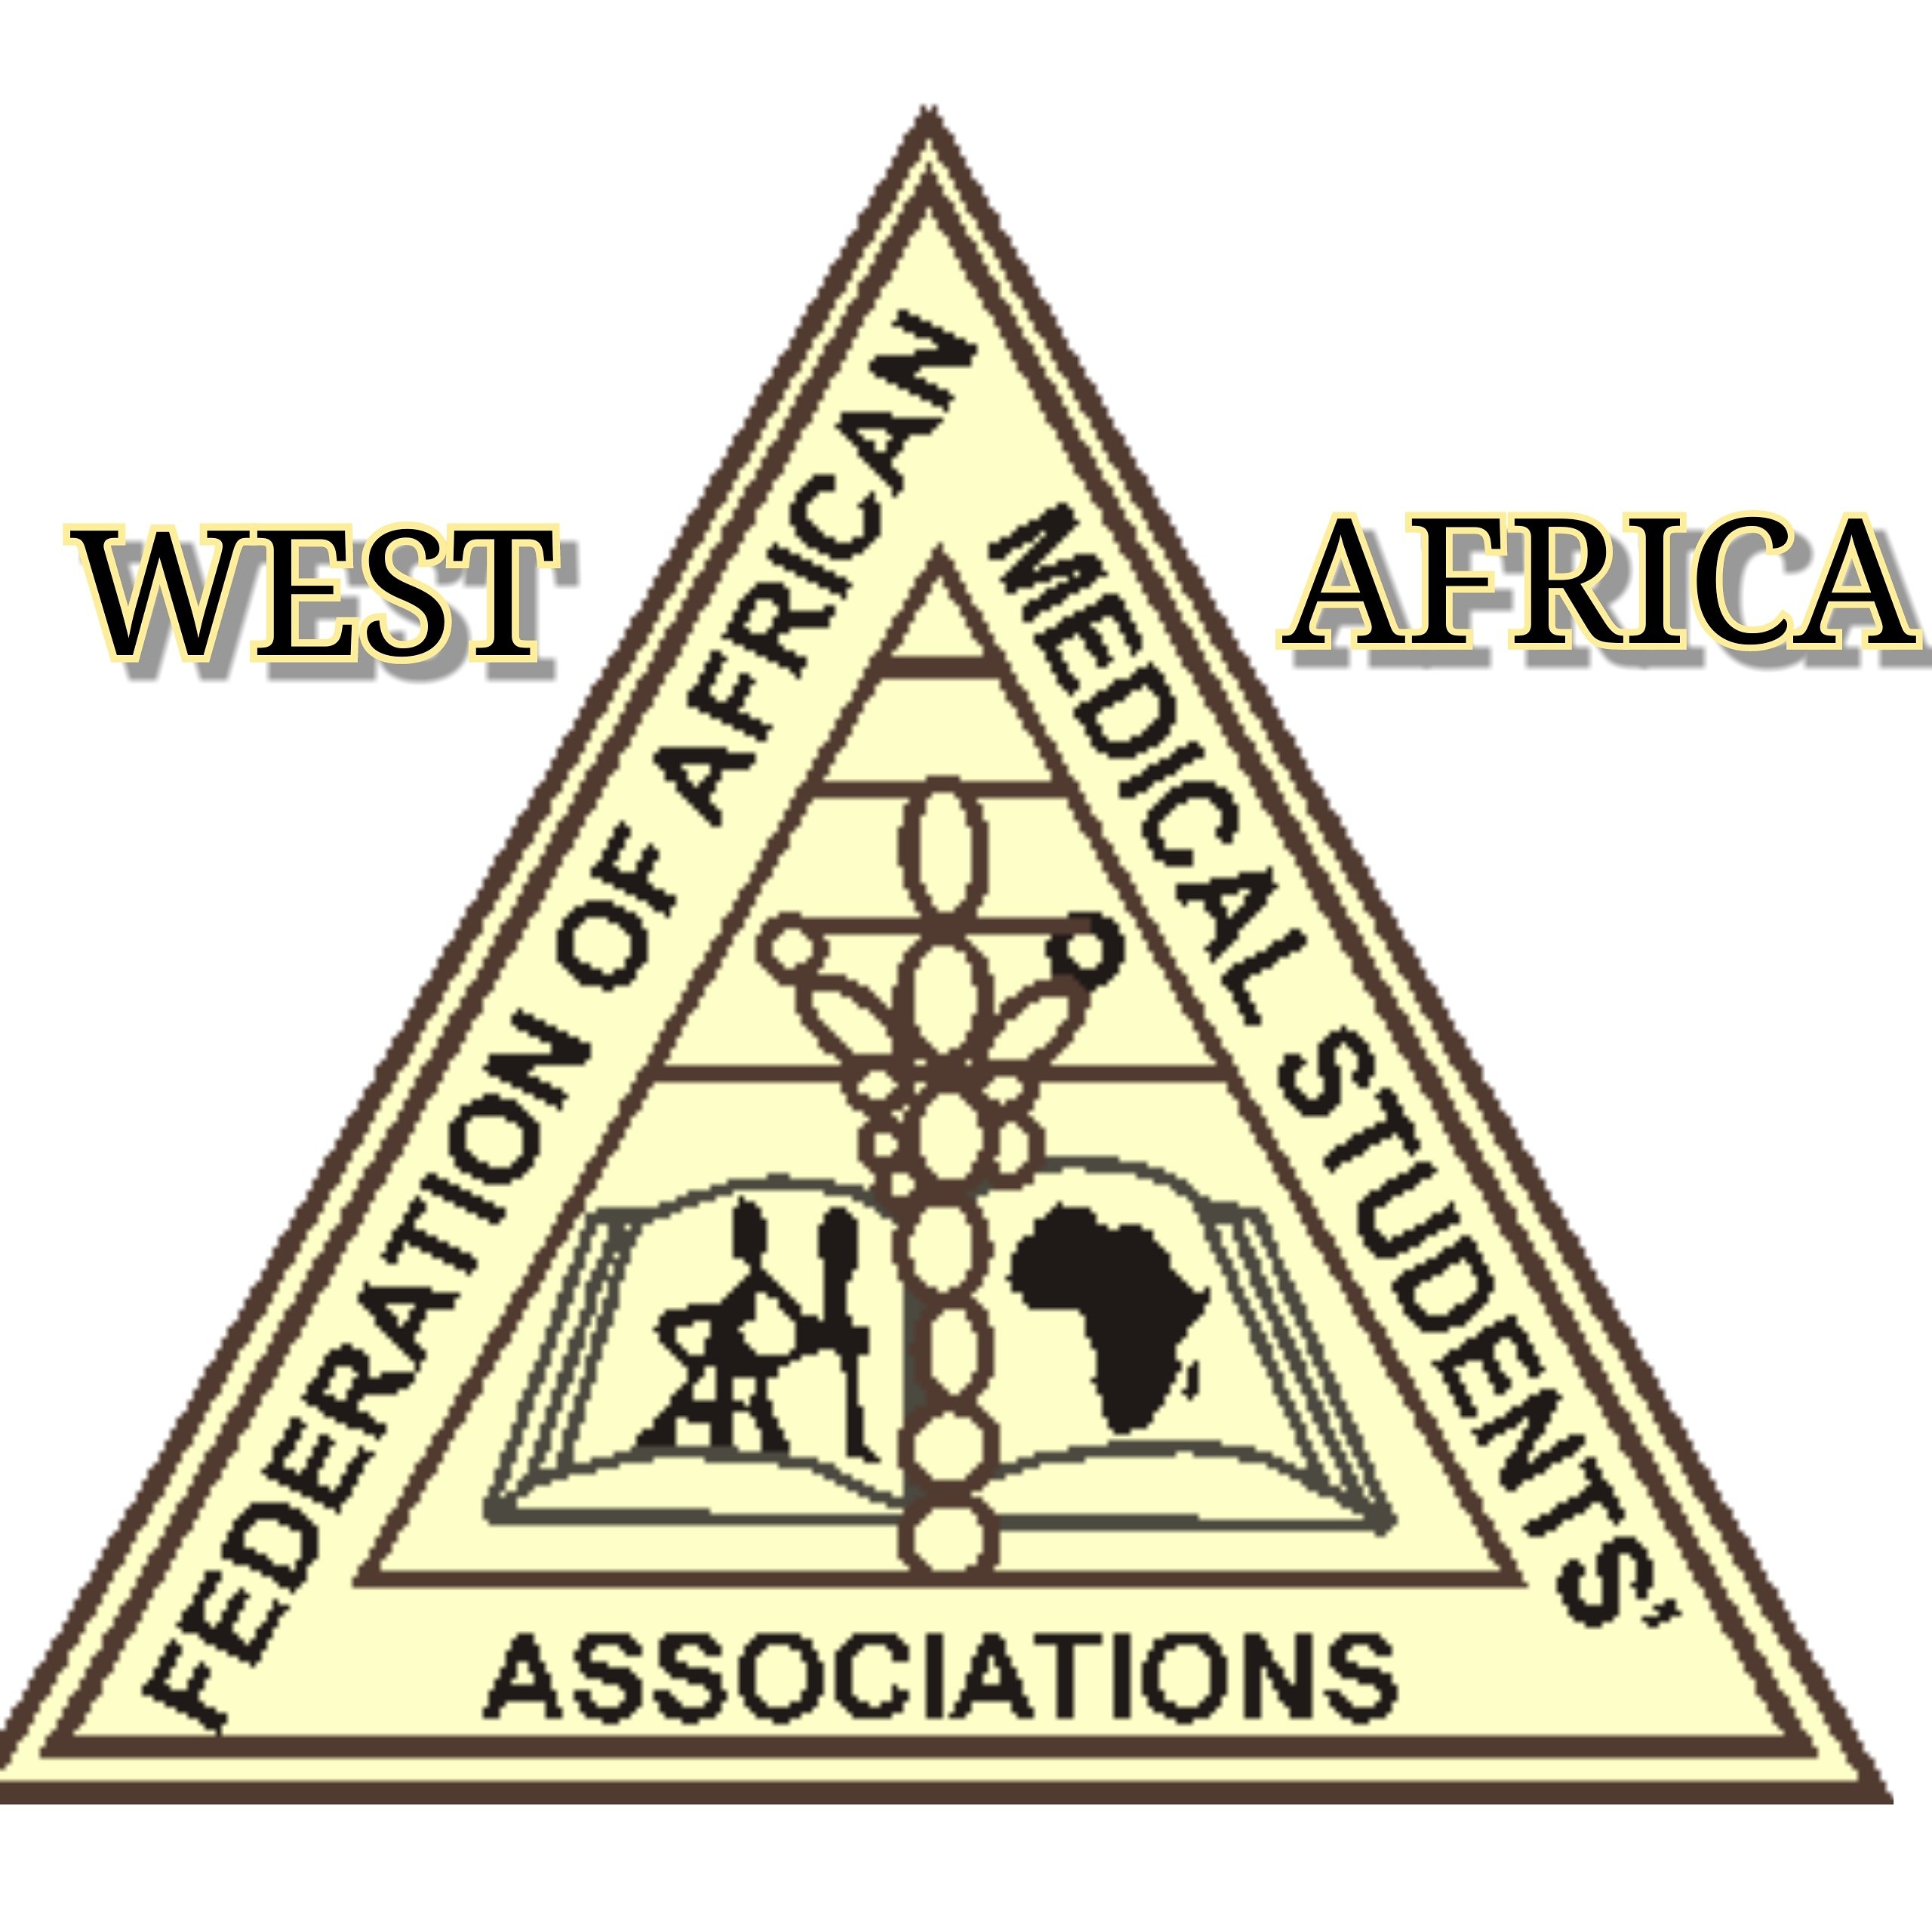 Official Account of the West African Region of Federation of Medical Students' Association (FAMSA) ...towards the Improvement of Healthcare in Africa 🌍